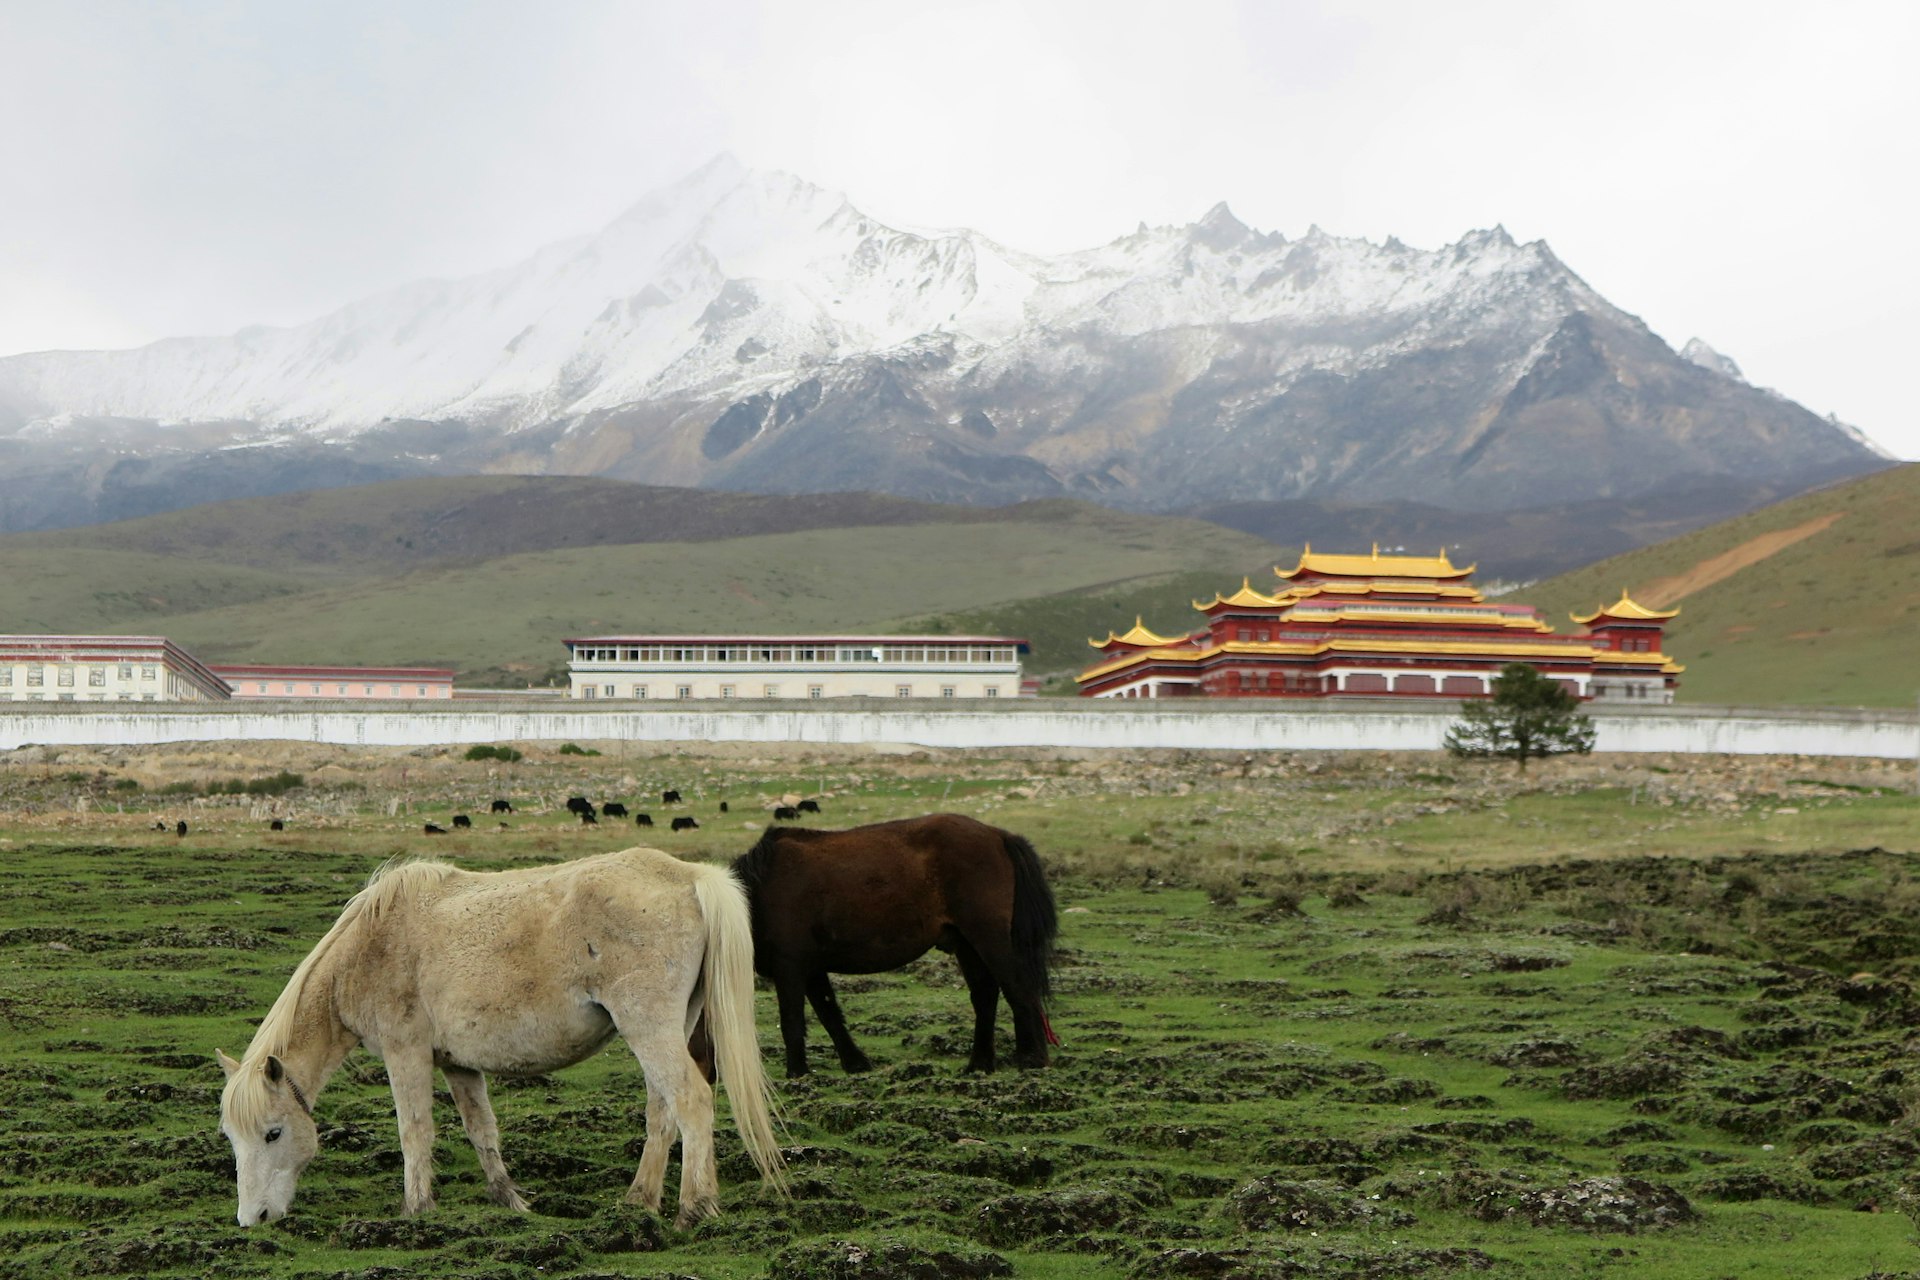 Horses graze at high altitudes near Tagong. Image by Tienlon Ho / Lonely Planet